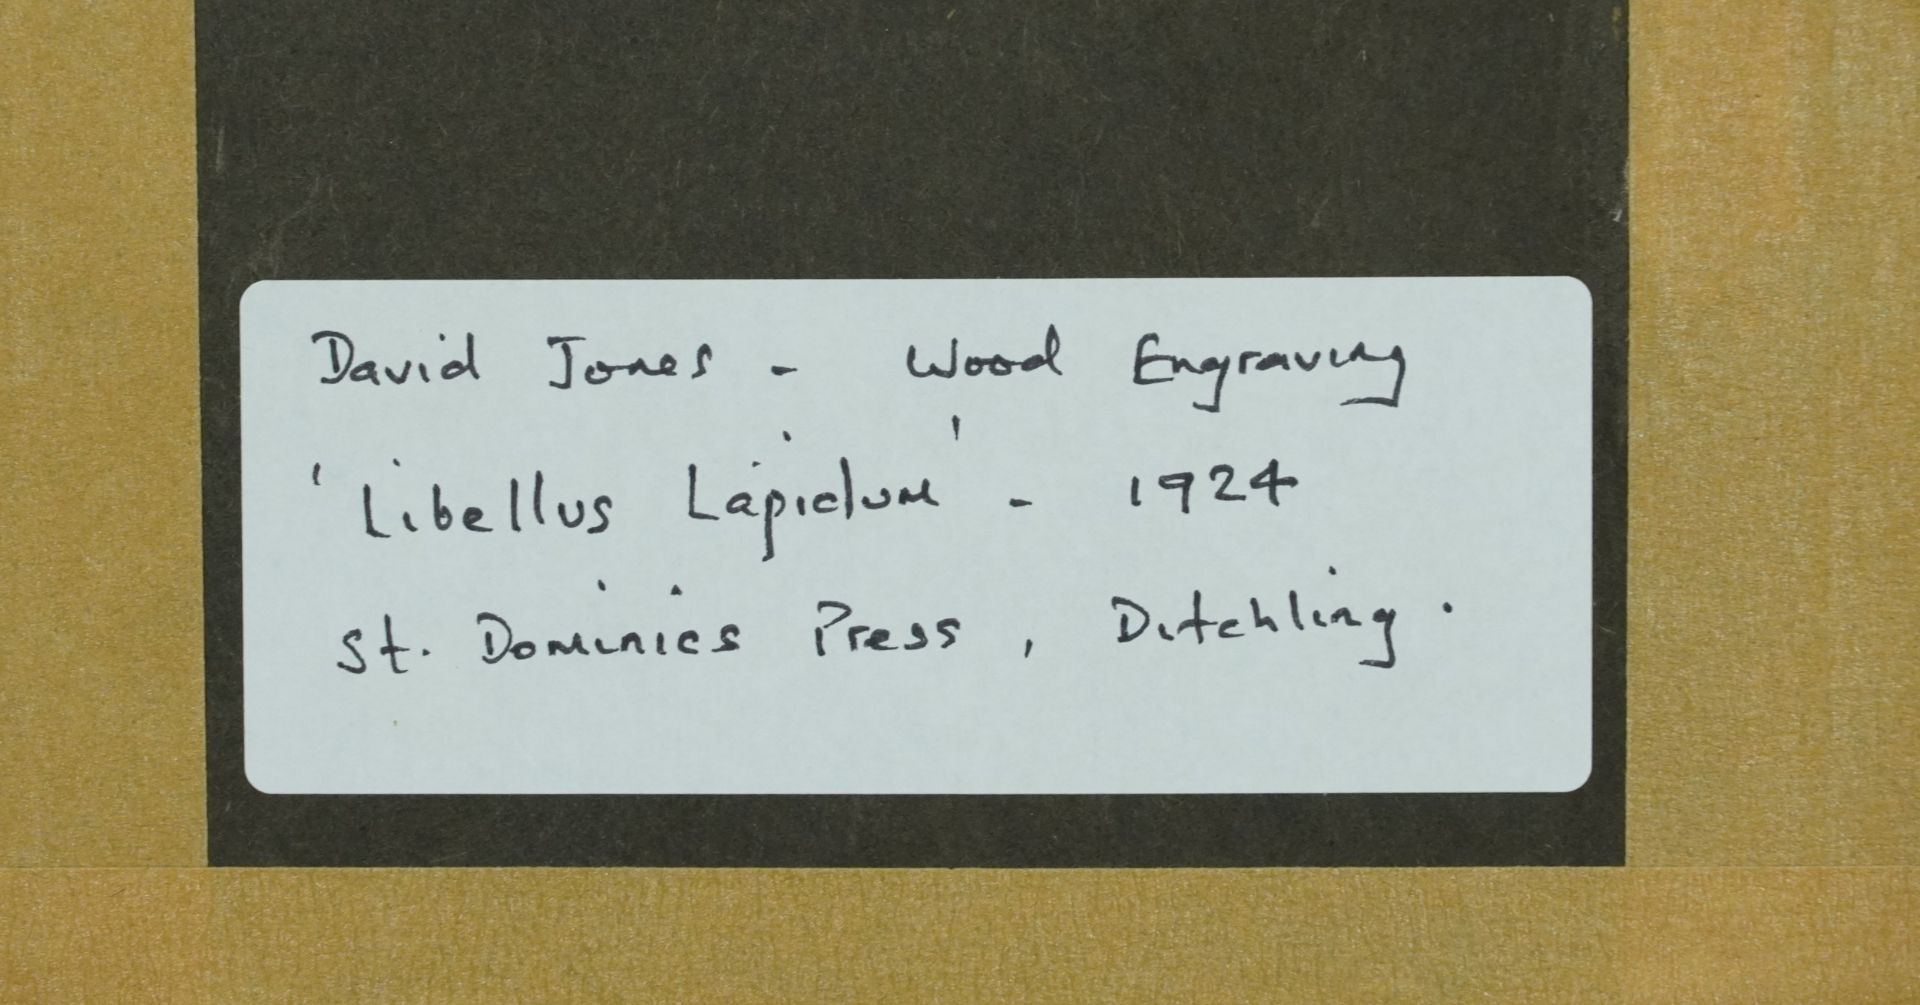 David Jones - Libellous Lapidum, two wood engravings, each inscribed St Dominic's Press Ditchling - Image 9 of 9